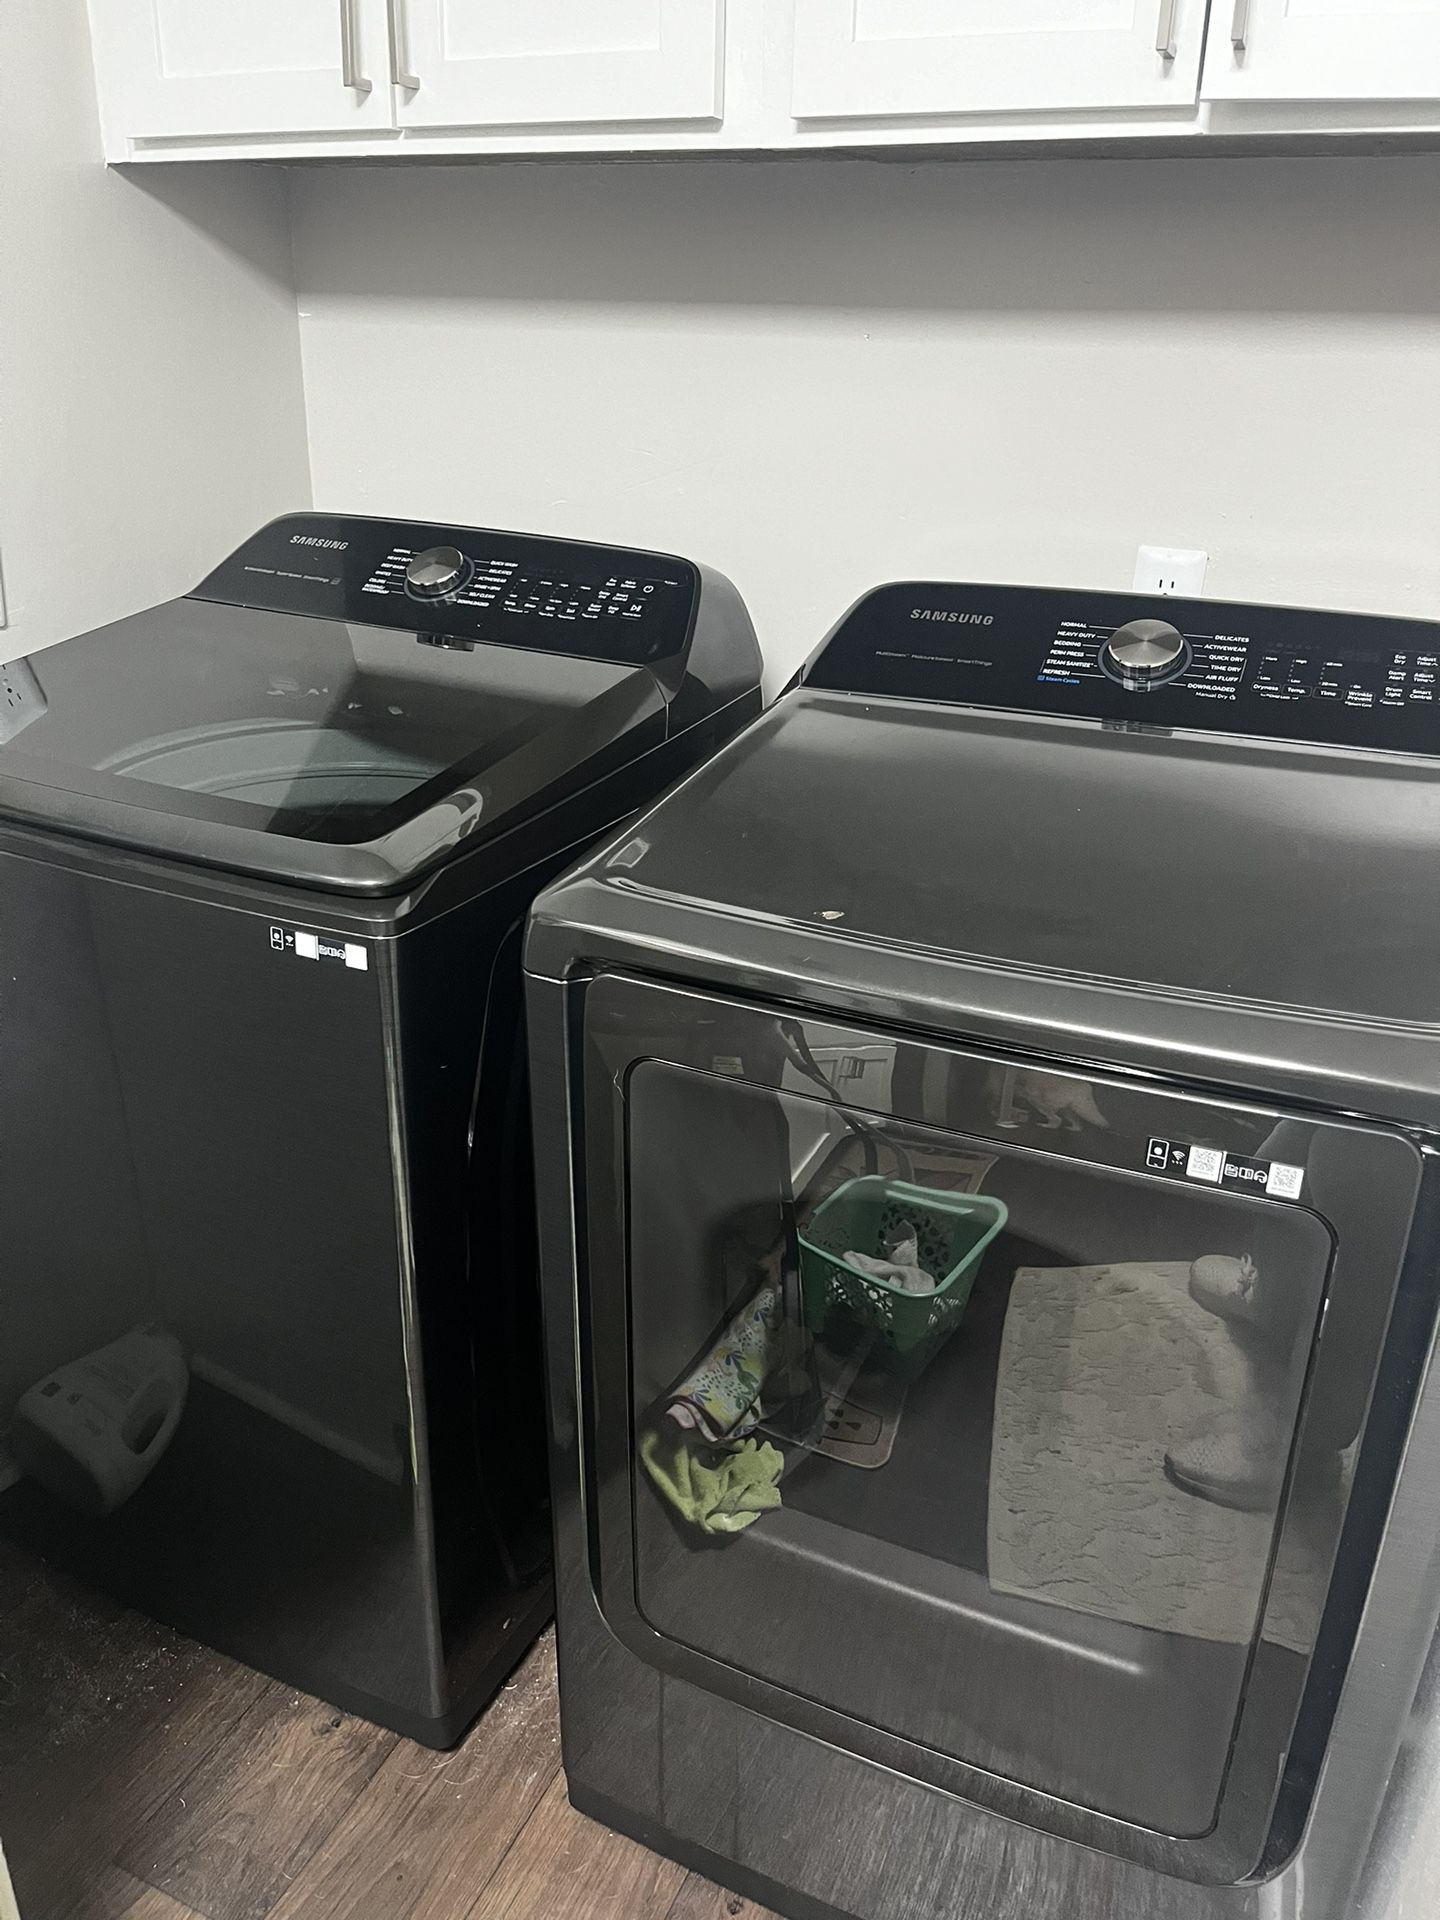 Samsung Washer and Dryer - PROTECTION PLAN STILL VALID